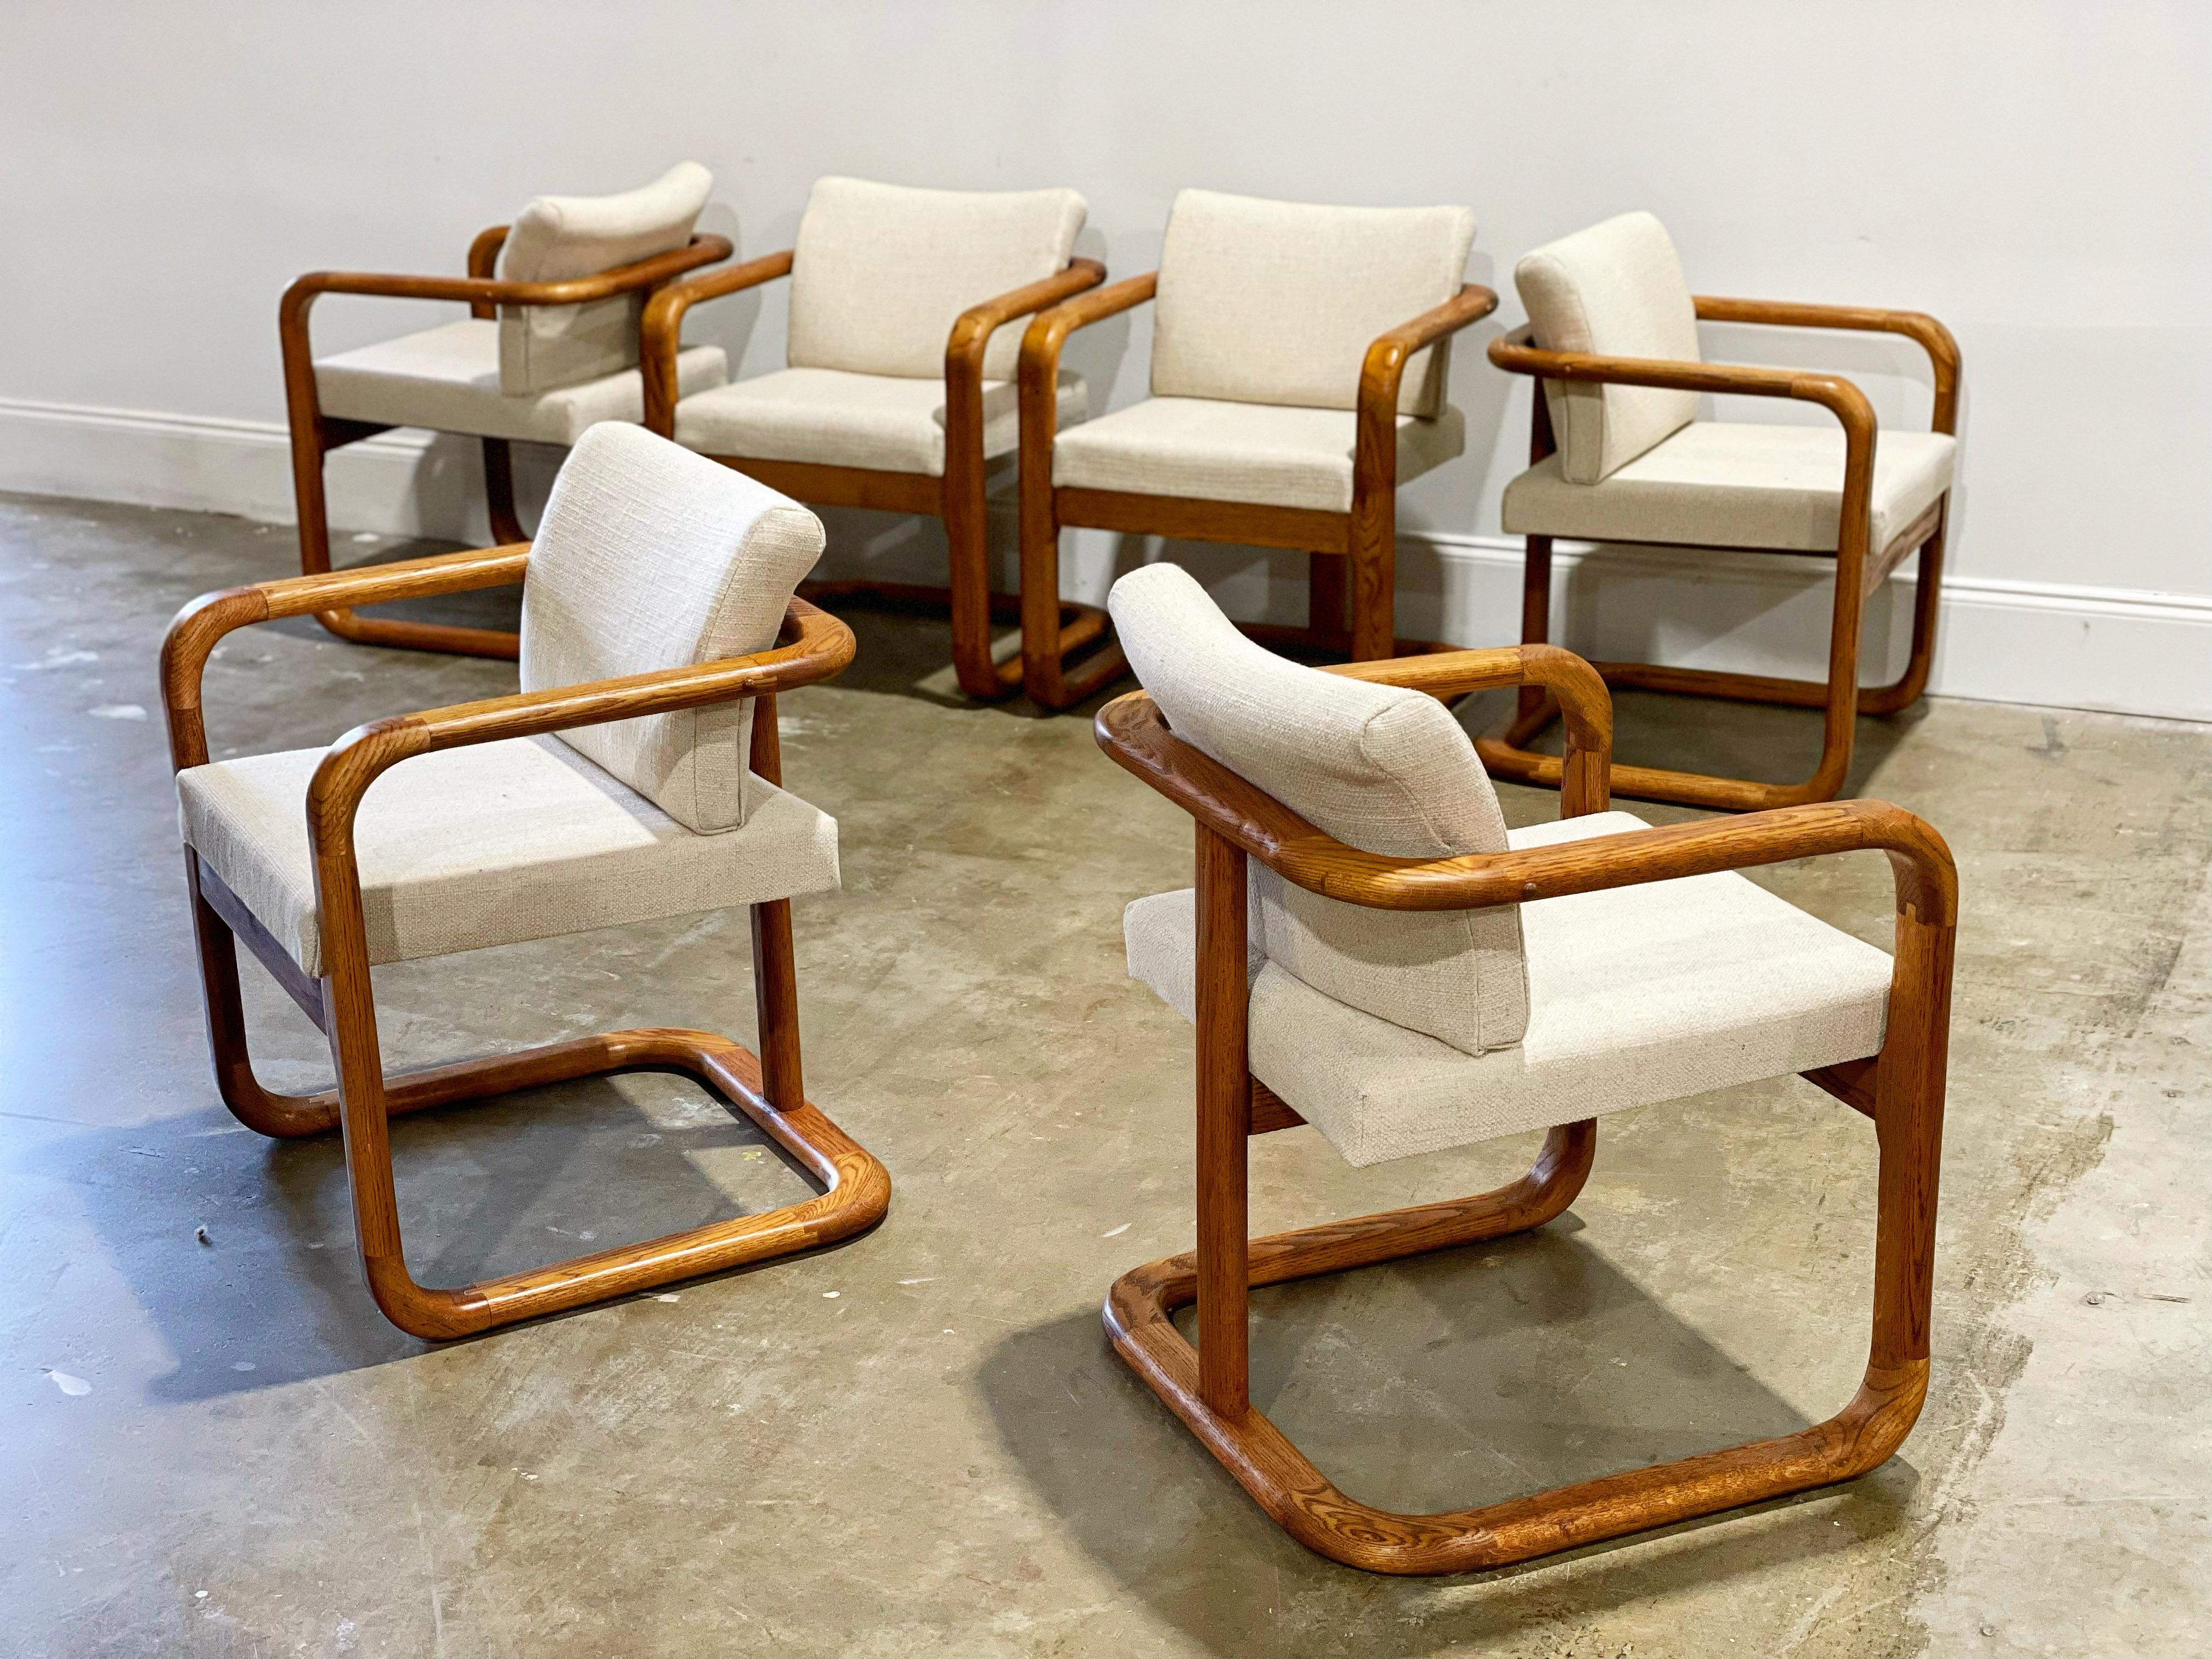 Sculpted bentwood oak dining chairs after Lou Hodges. This set of six is unique on the market. Stellar design and a gorgeous profile - perfect juxtaposition of shape and form. Upholstered seats and swivel backs provide maximum comfort with